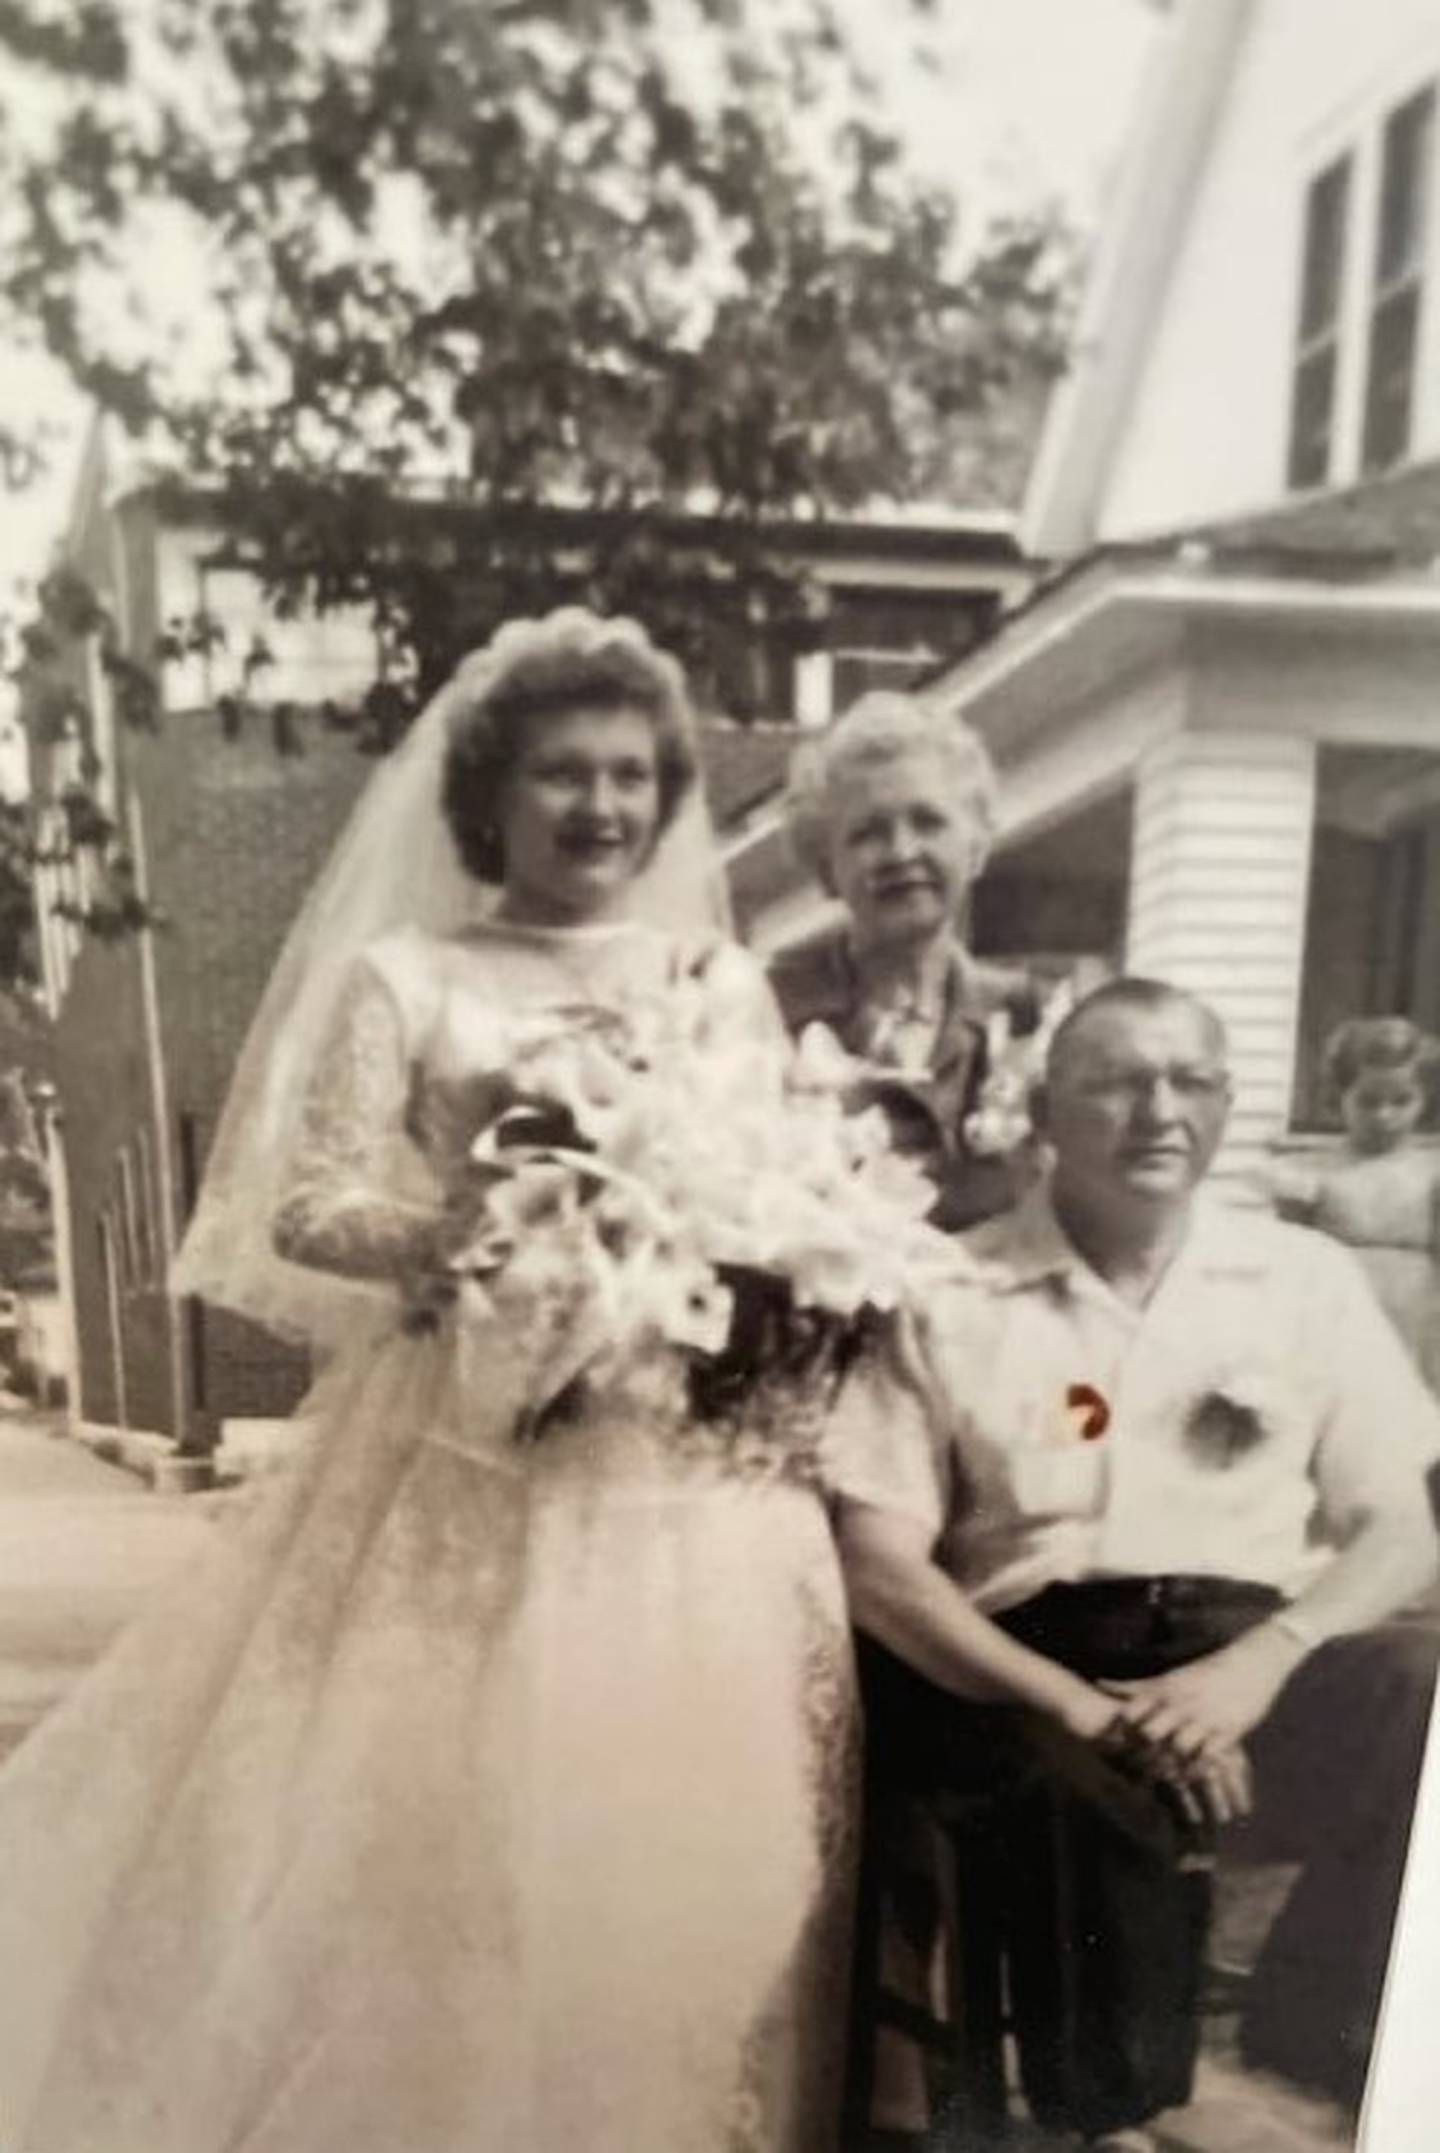 Former Wilmington resident Carol Juricic is pictured with her parents Alma and Arthur. Carol later became a foster parent to hundreds of children. She also adopted four children.